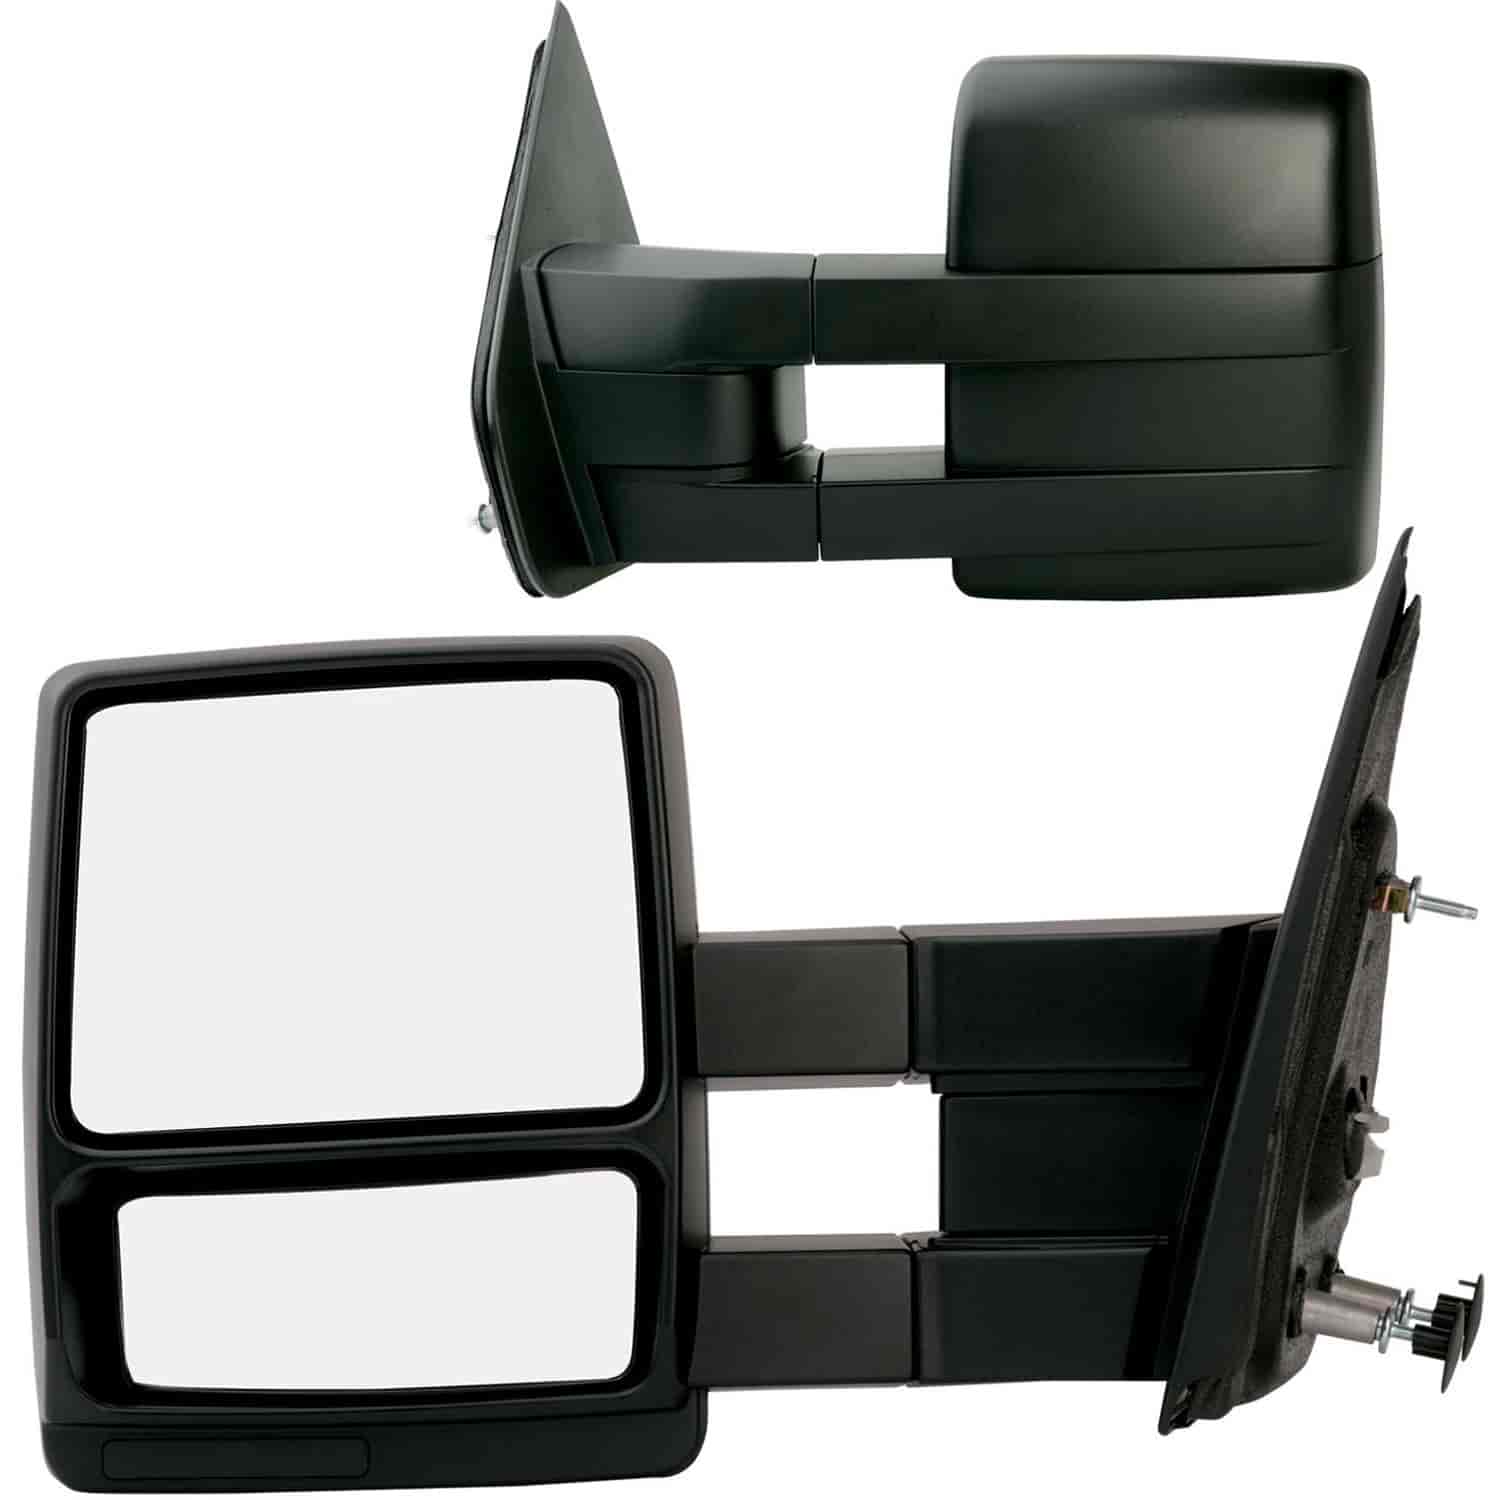 OEM Style Replacement mirror for 04-14 Ford F150 extendable towing mirror driver and passenger side